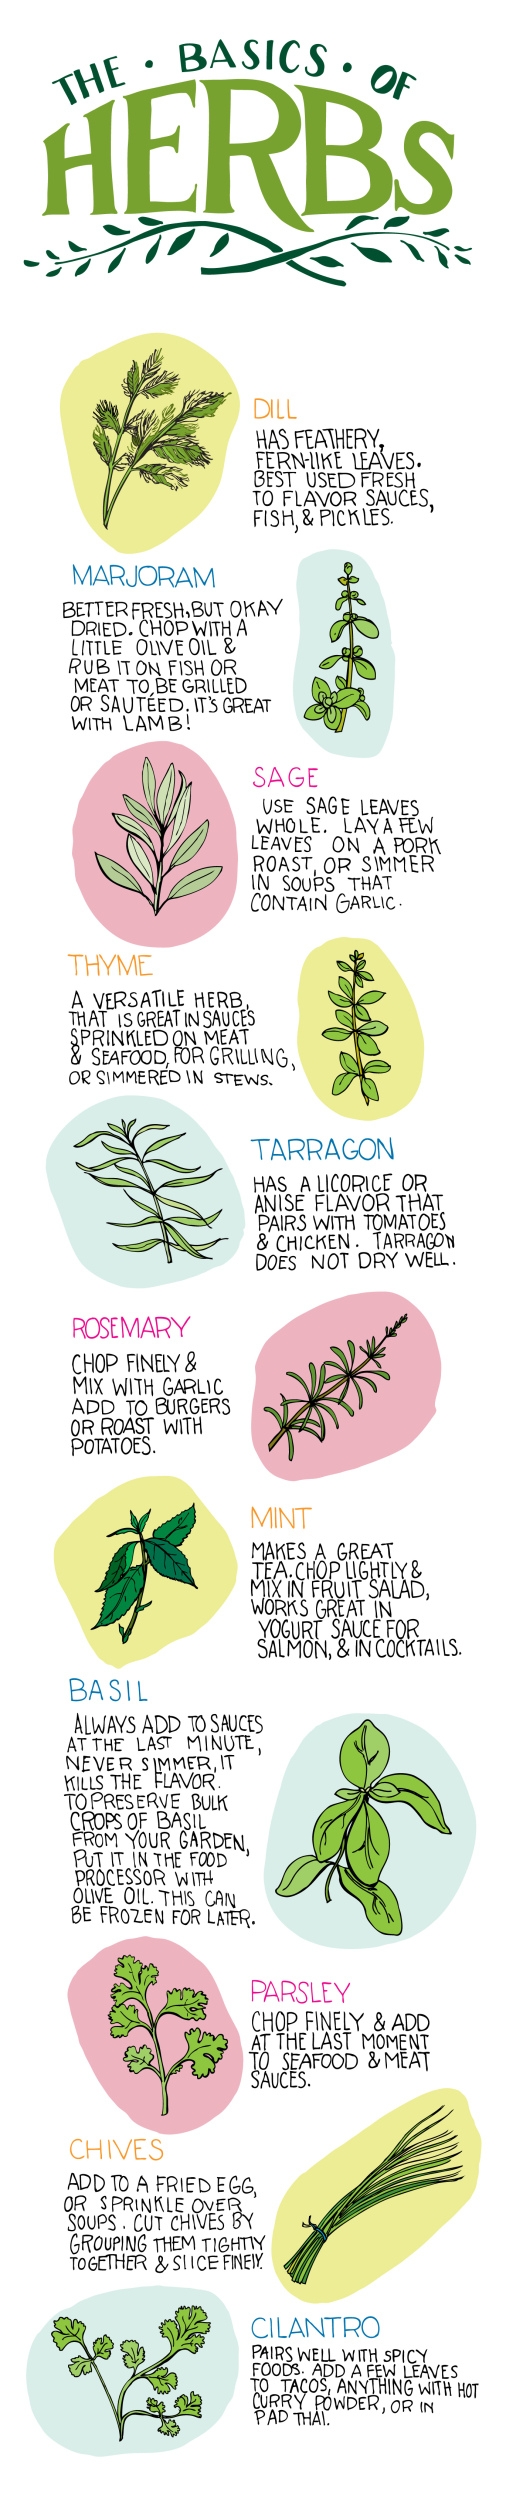 The Basics of Herbs For Beginners Infographic